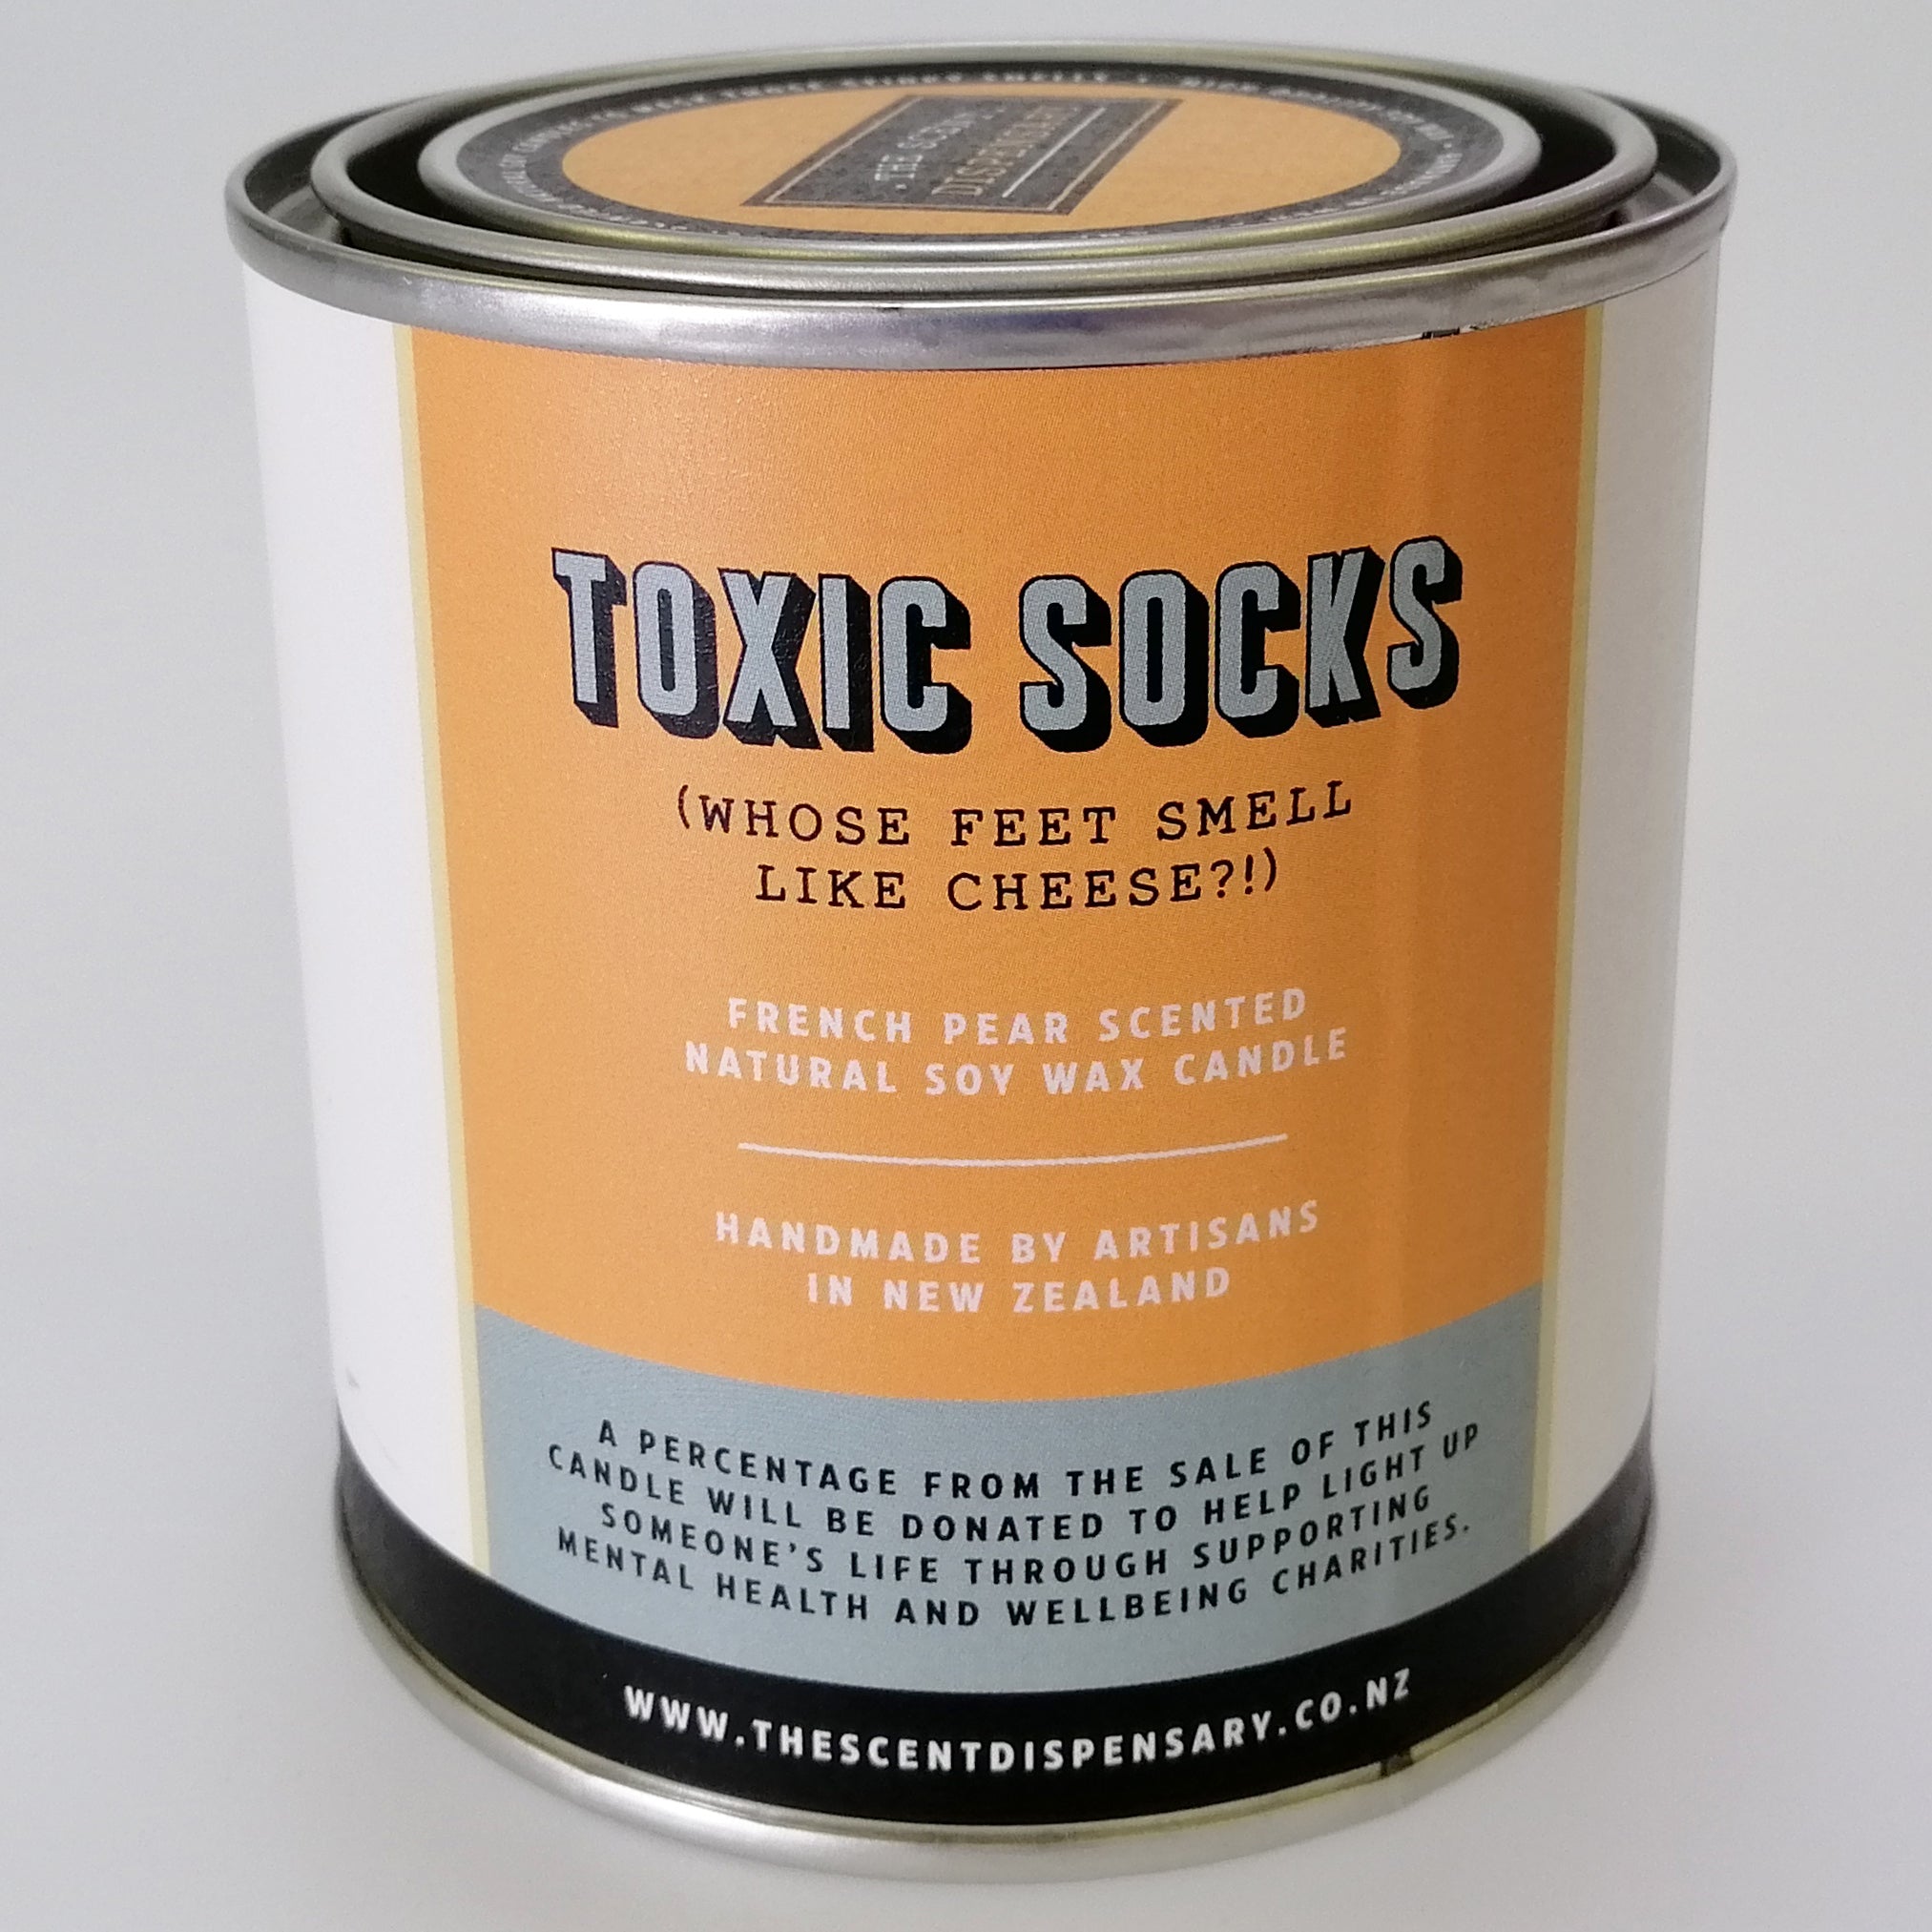 'Toxic Socks' French Pear Canned Candle